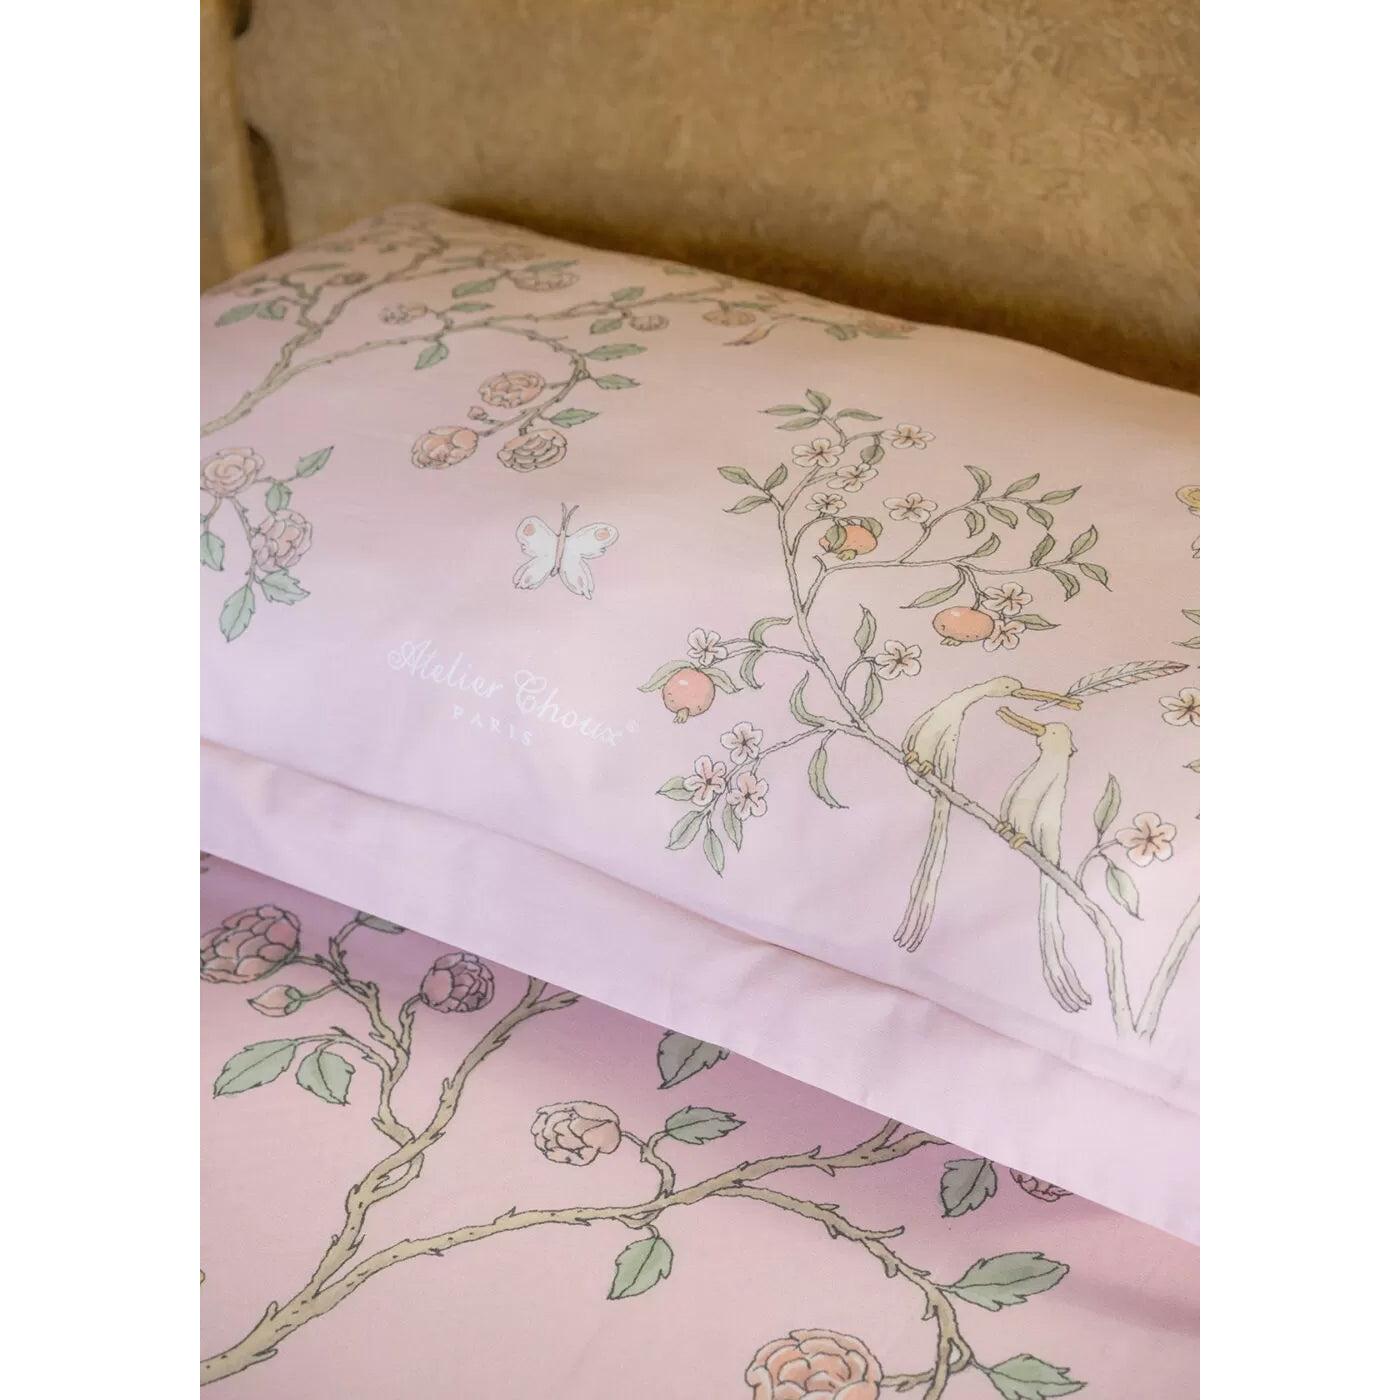 atelier-choux-single-bed-pillow-cover-in-bloom-pink-atel-1181277